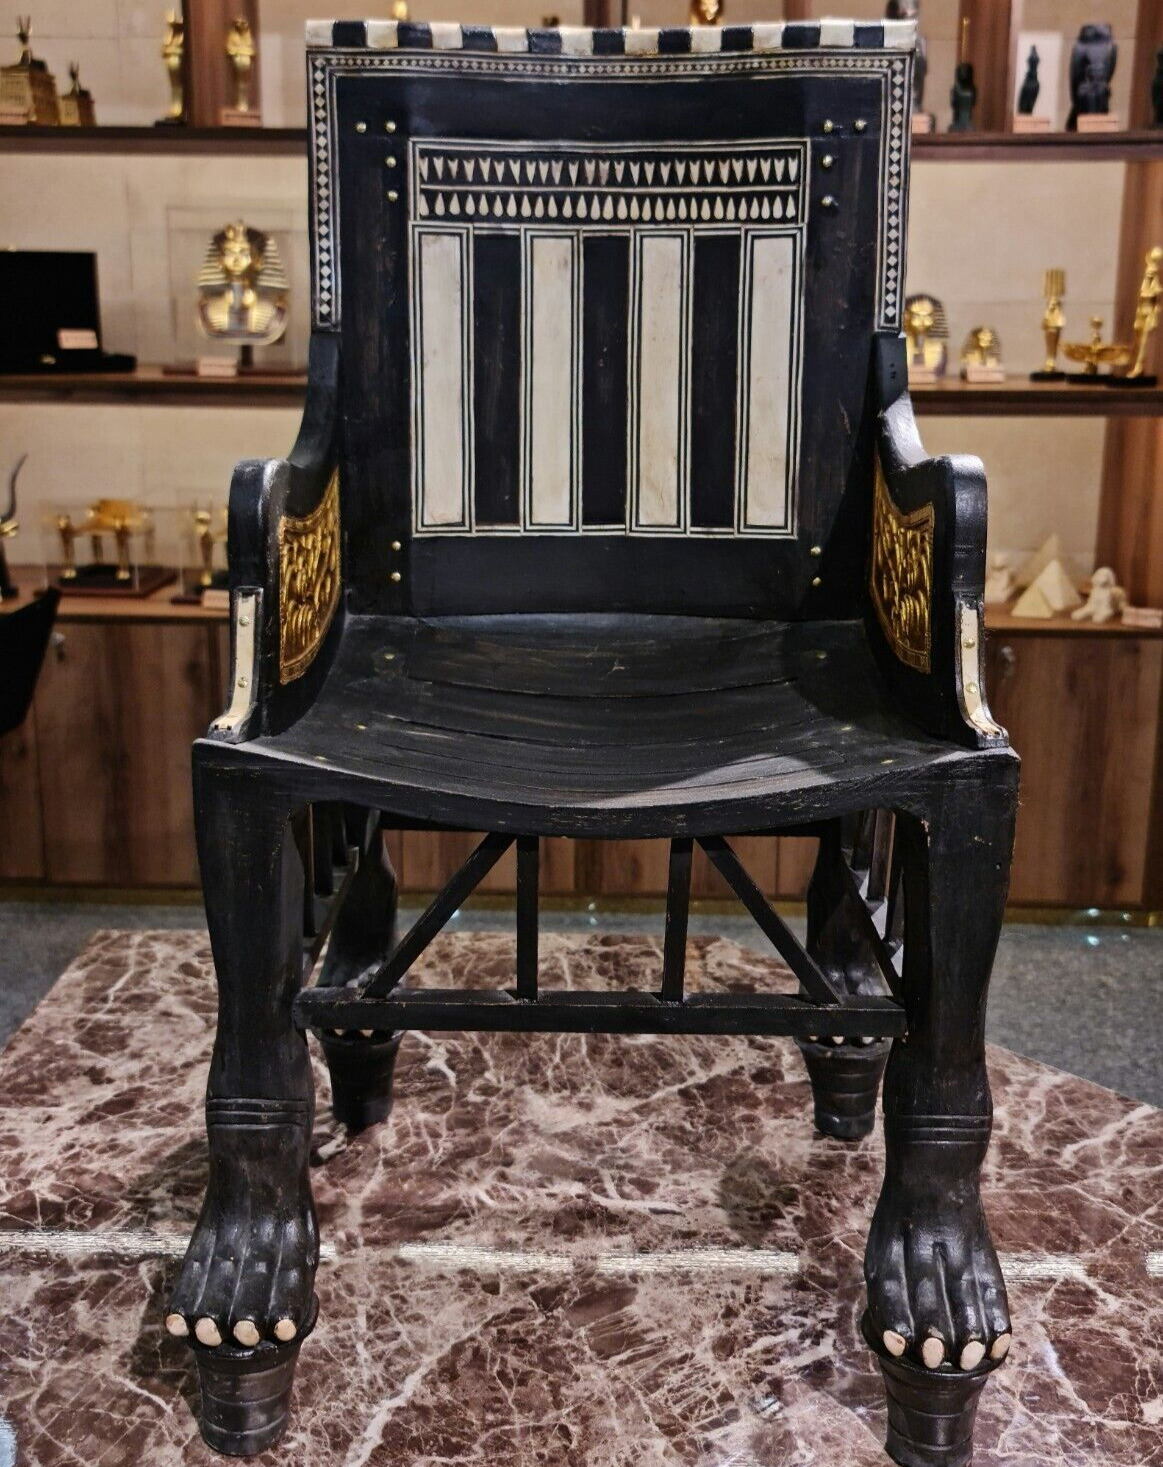 The Golden King Tut Wooden Child's Chair, Hand crafted, Limited Edition